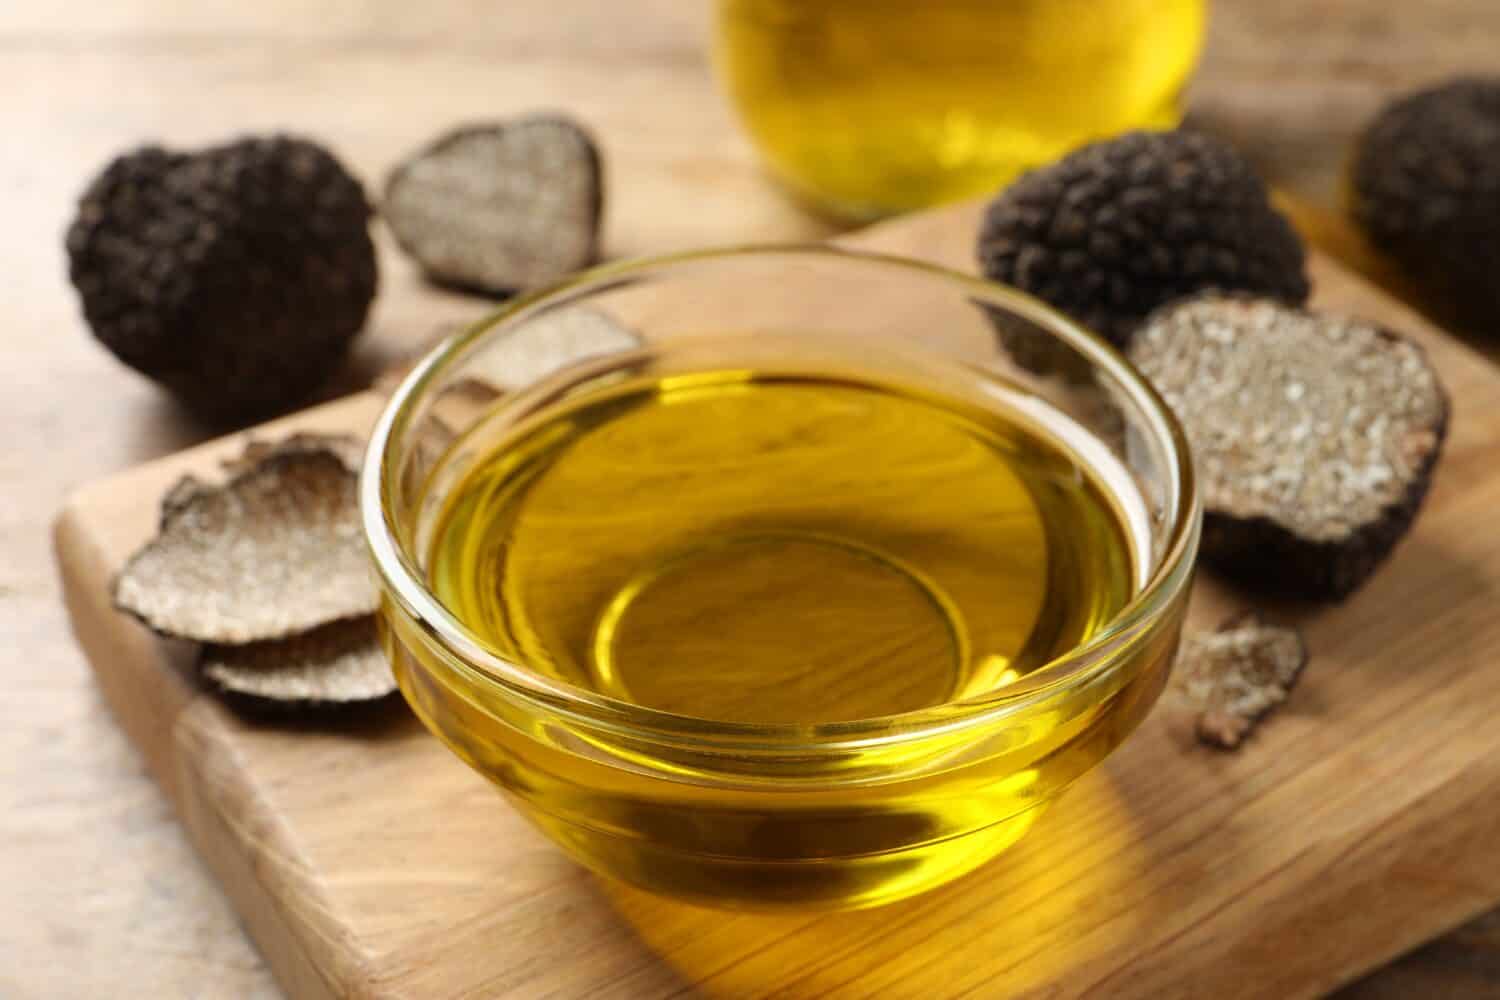 Glass bowl of truffle oil with wooden board on table, closeup